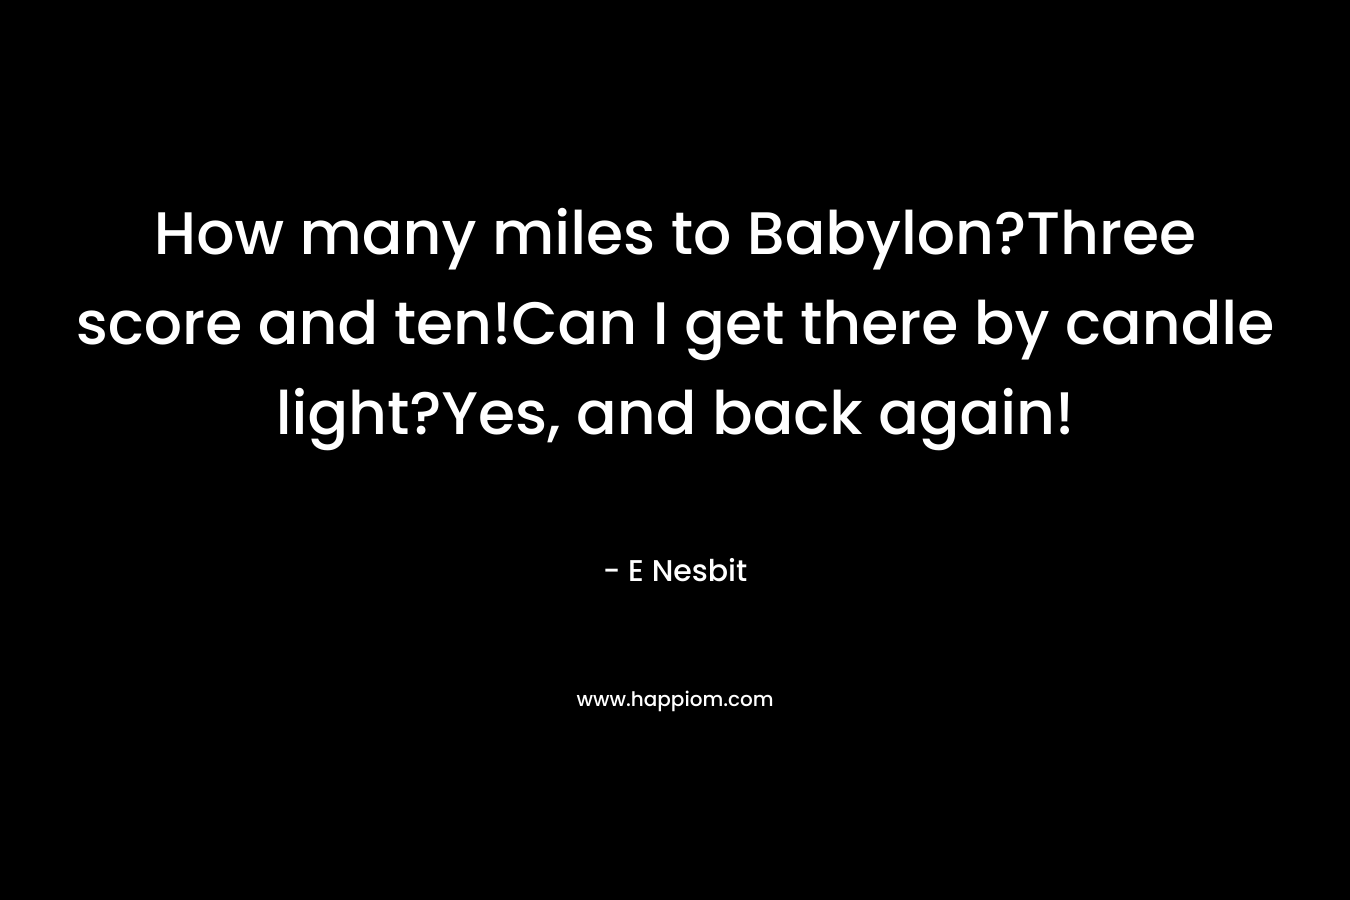 How many miles to Babylon?Three score and ten!Can I get there by candle light?Yes, and back again!